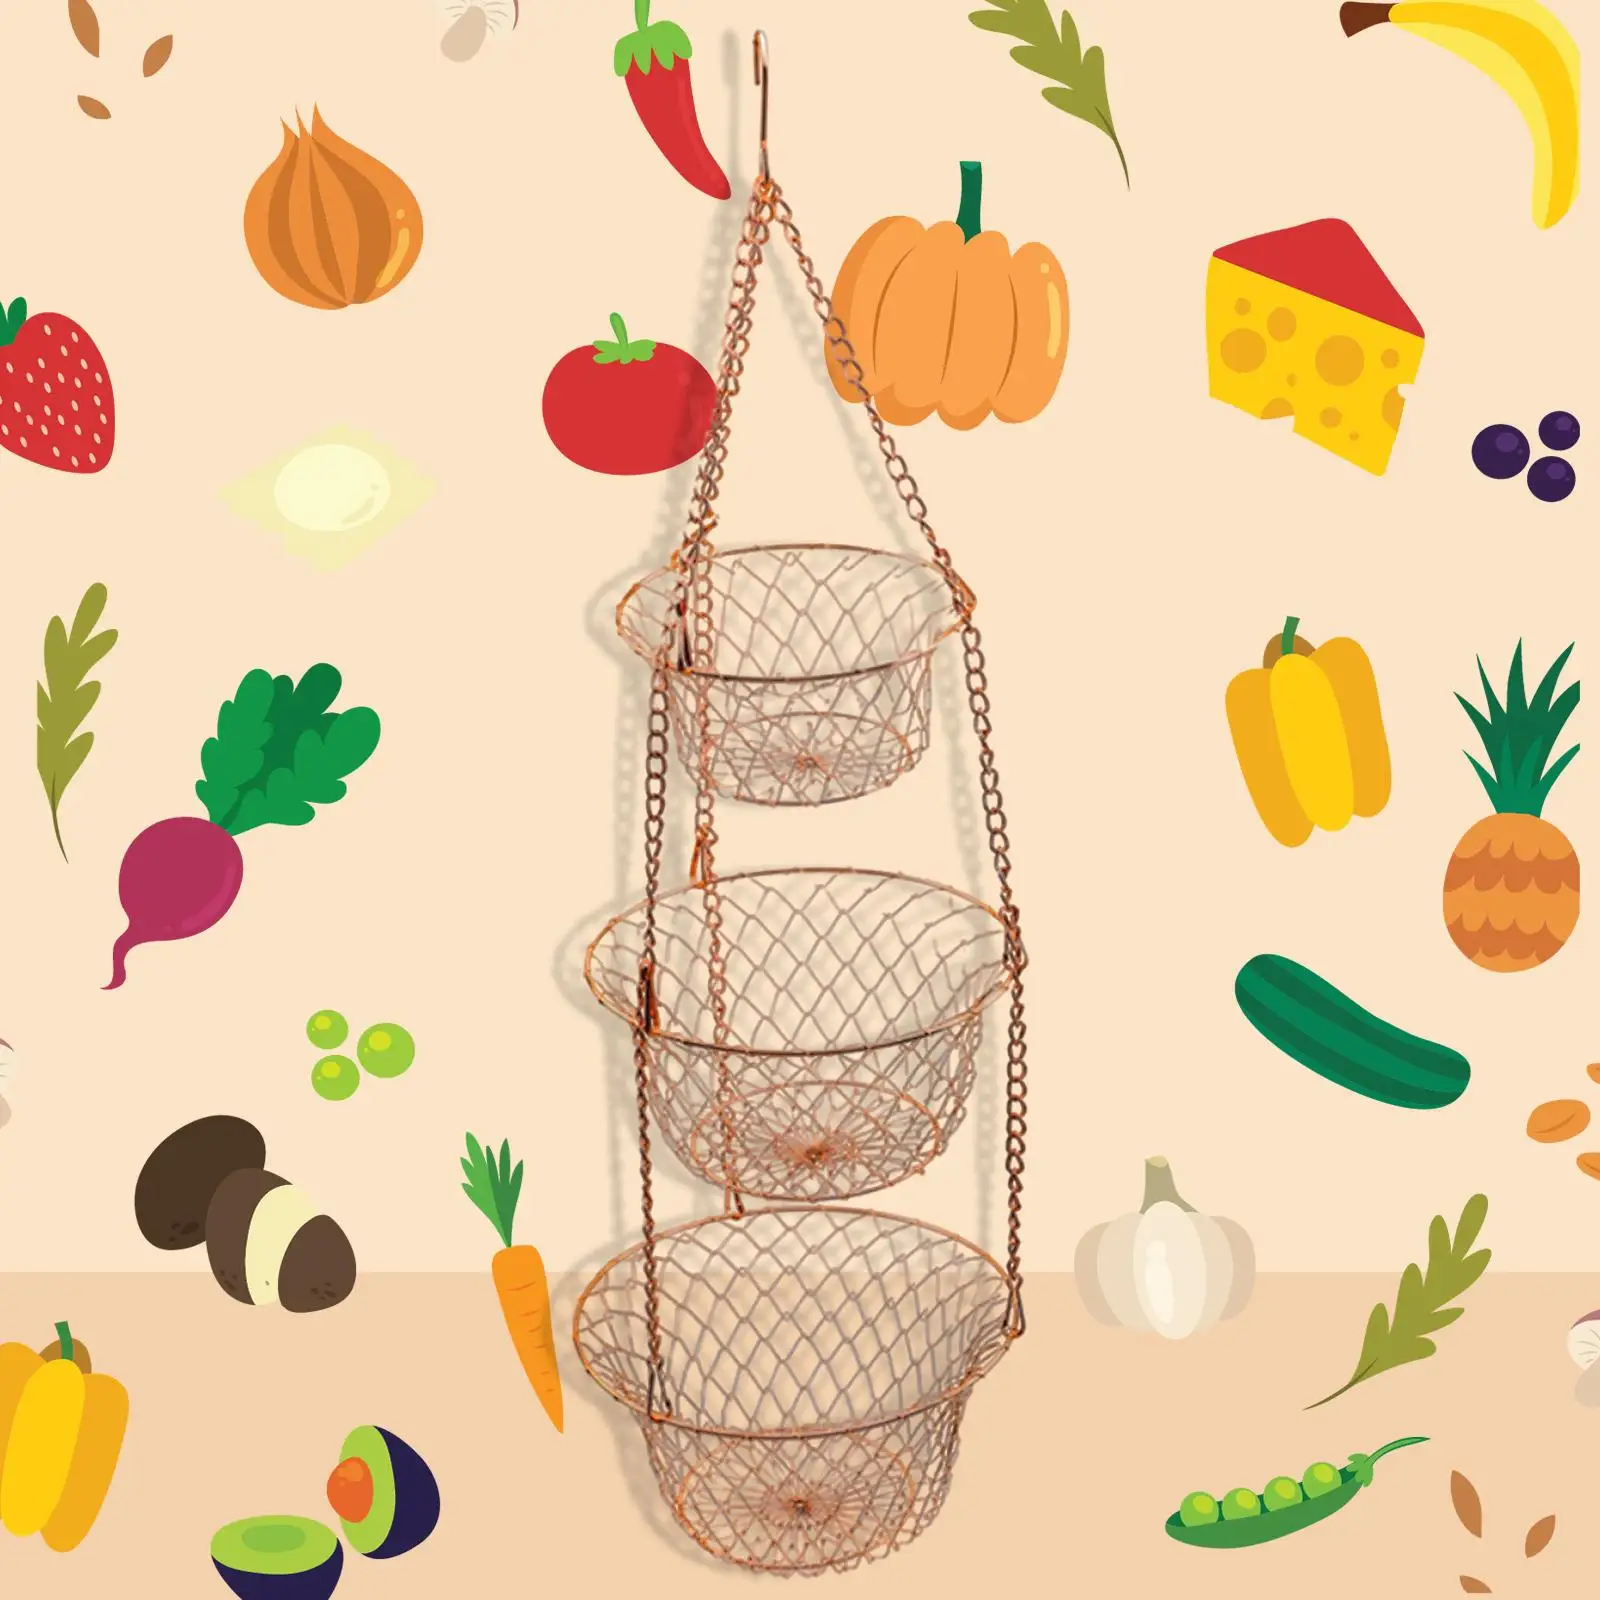 3 Tier Hanging Fruit and Vegetable Basket Heavy Duty Wire Fruit Organizer 3 Tiered Hanging Organizer Basket for Kitchen